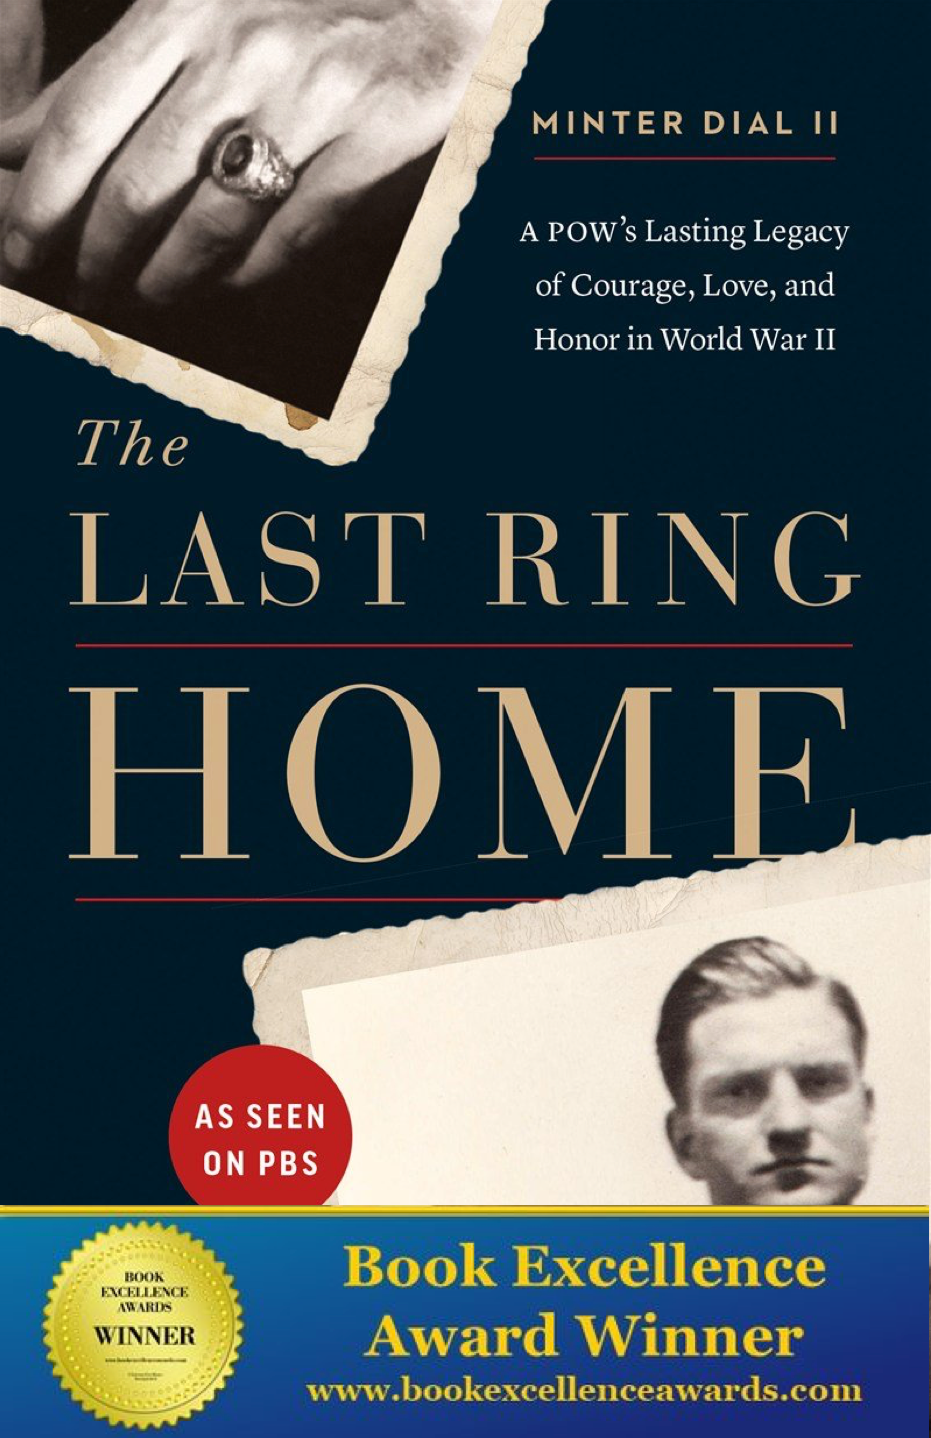 The Last Ring Home - hardcover book, signed by author